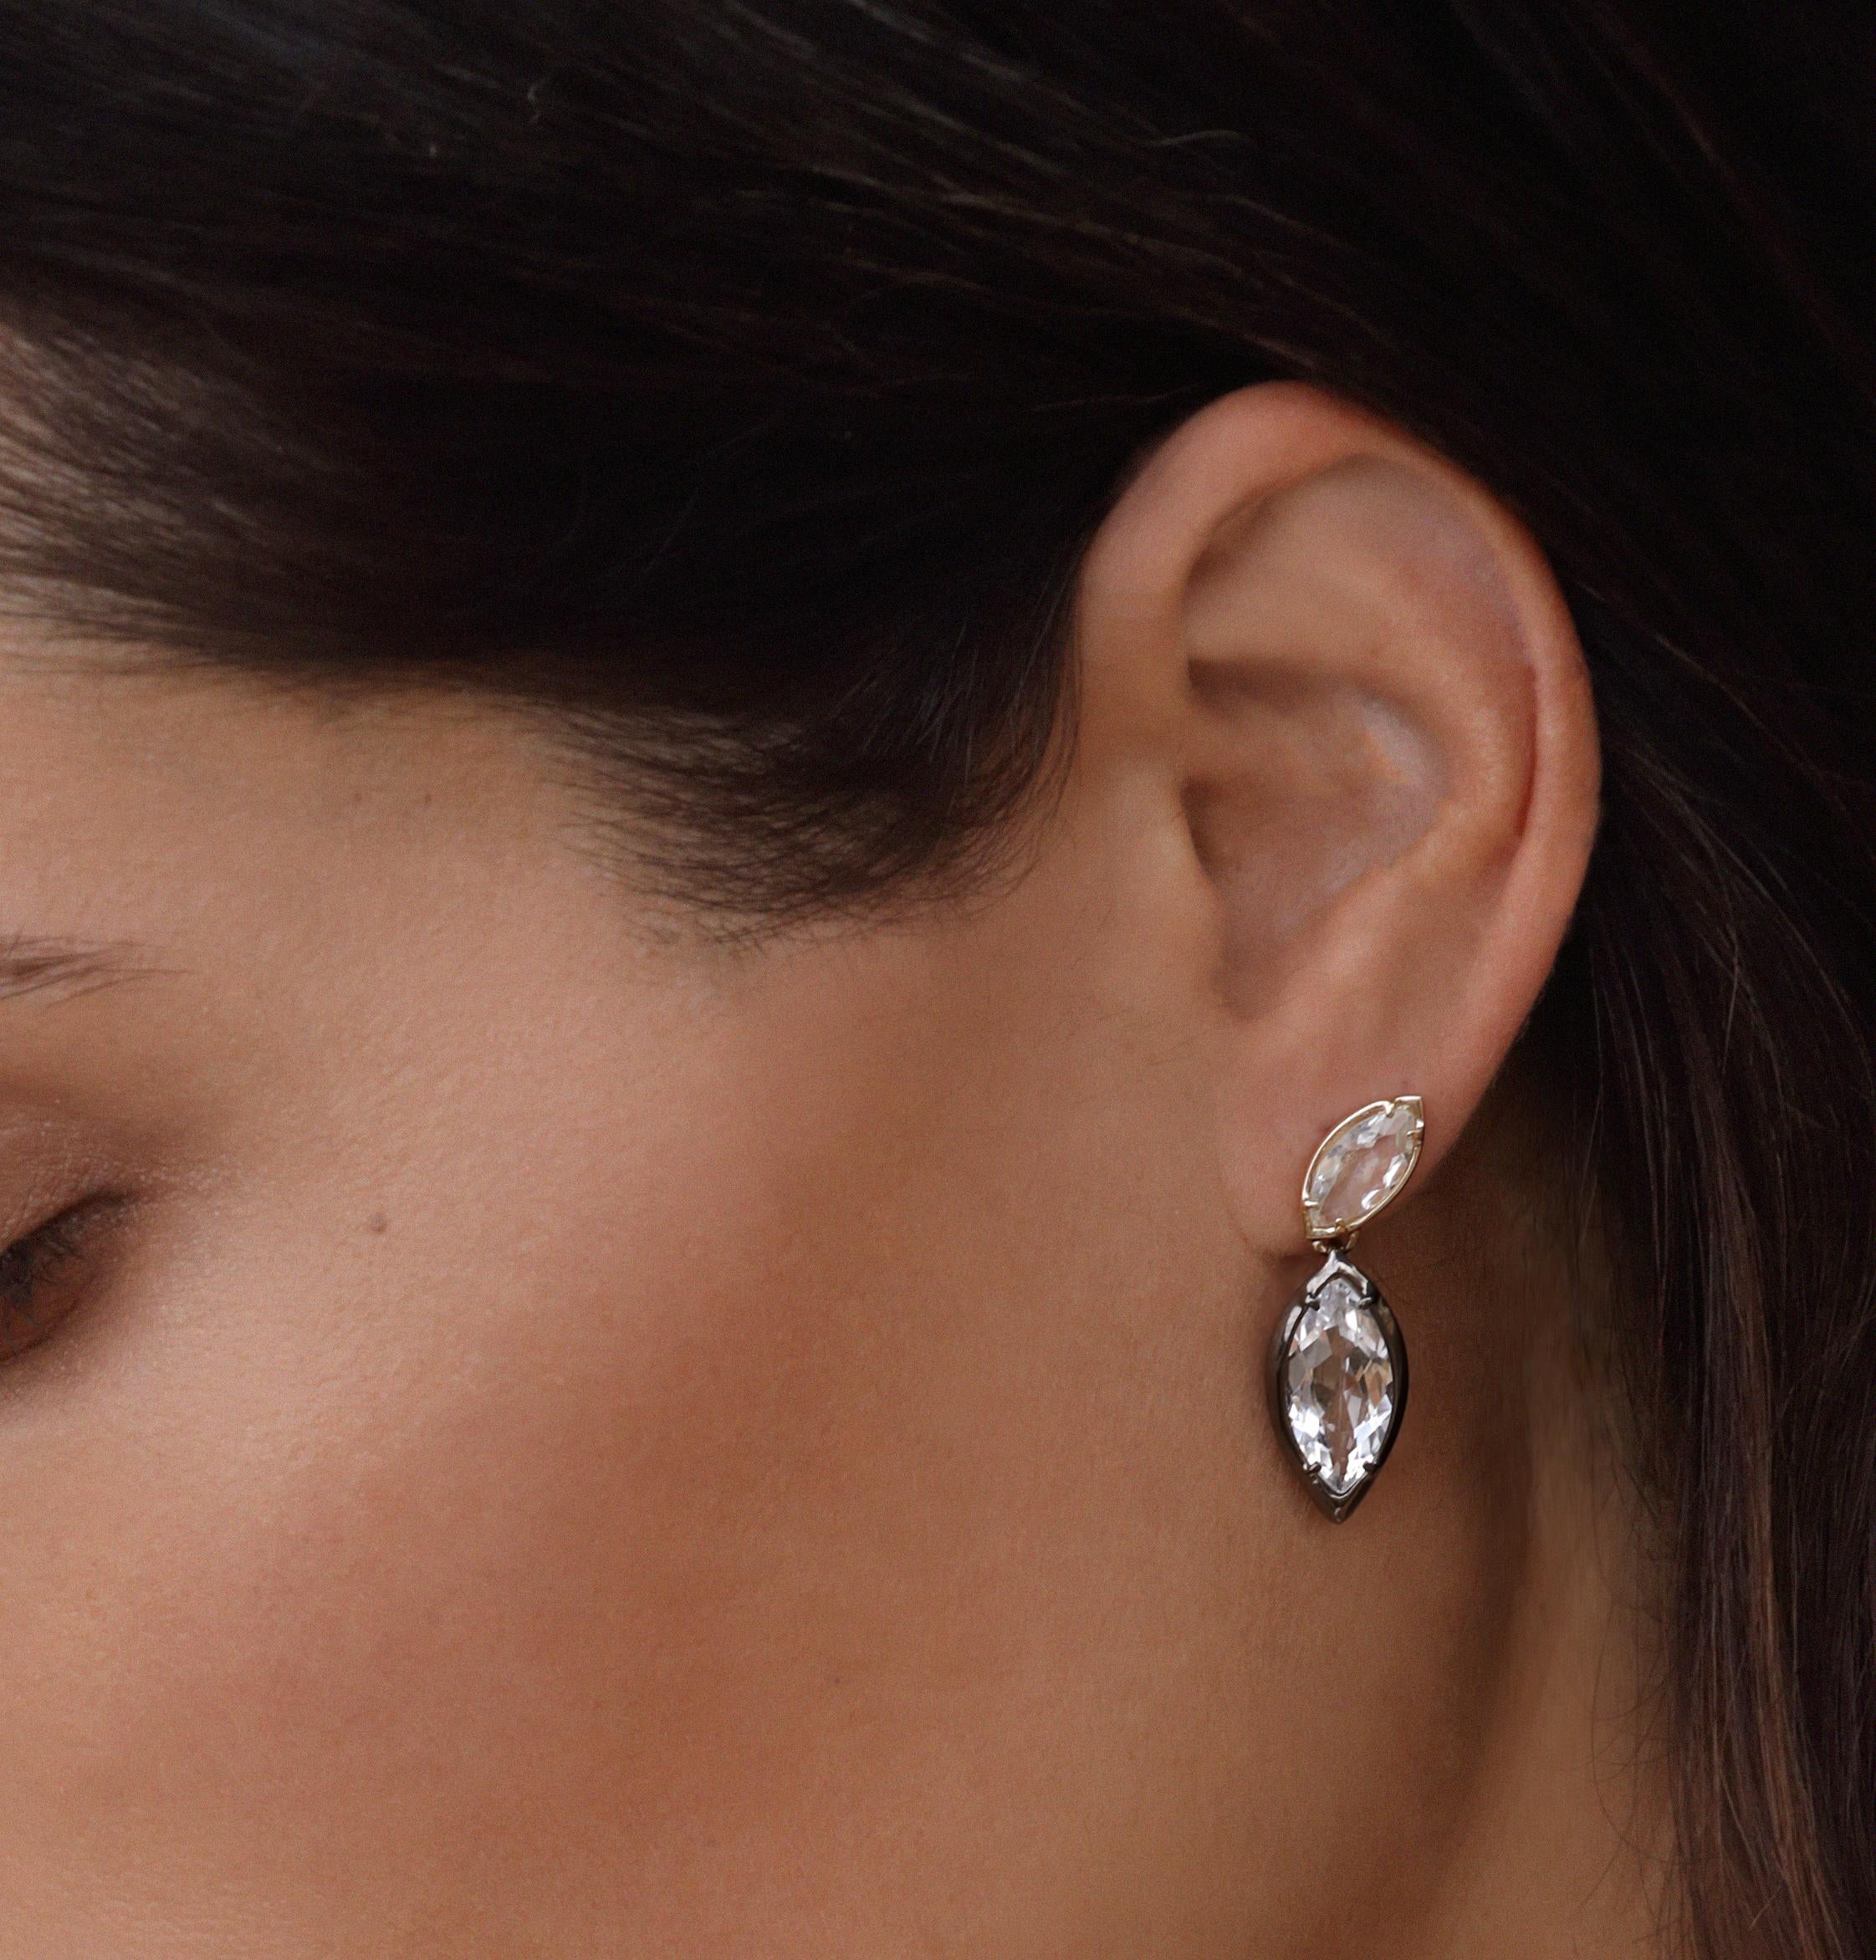 The Sway earrings are a dynamic asymmetrical design in an easy to wear silhouette with mixed metals featuring white topaz marquise stones.

14kt yellow gold tops
Sterling silver drops with blackened finish
Left & right earrings
14kt gold posts with